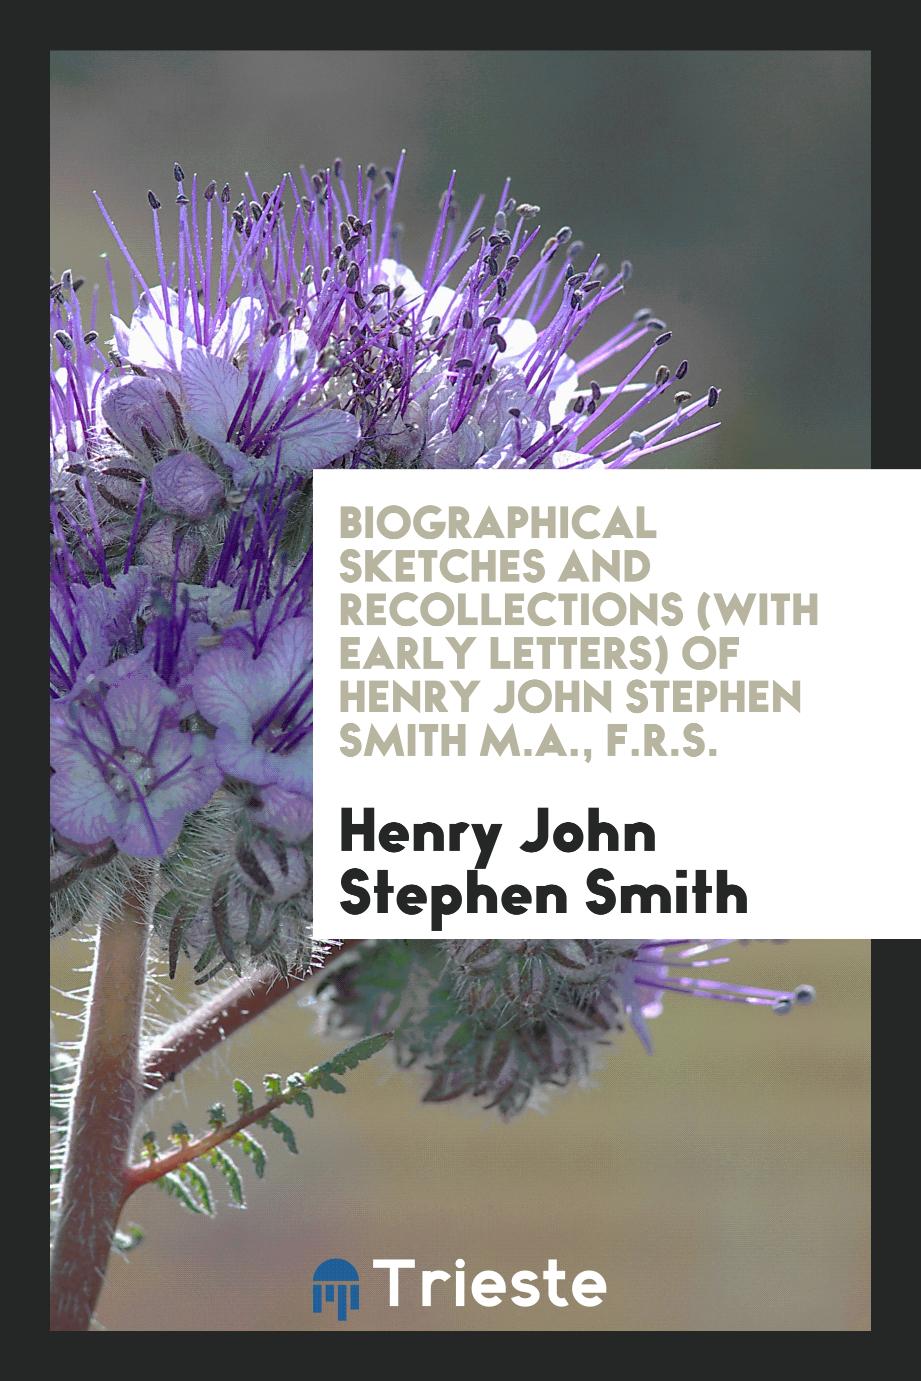 Biographical Sketches and Recollections (with Early Letters) of Henry John Stephen Smith M.A., F.R.S.